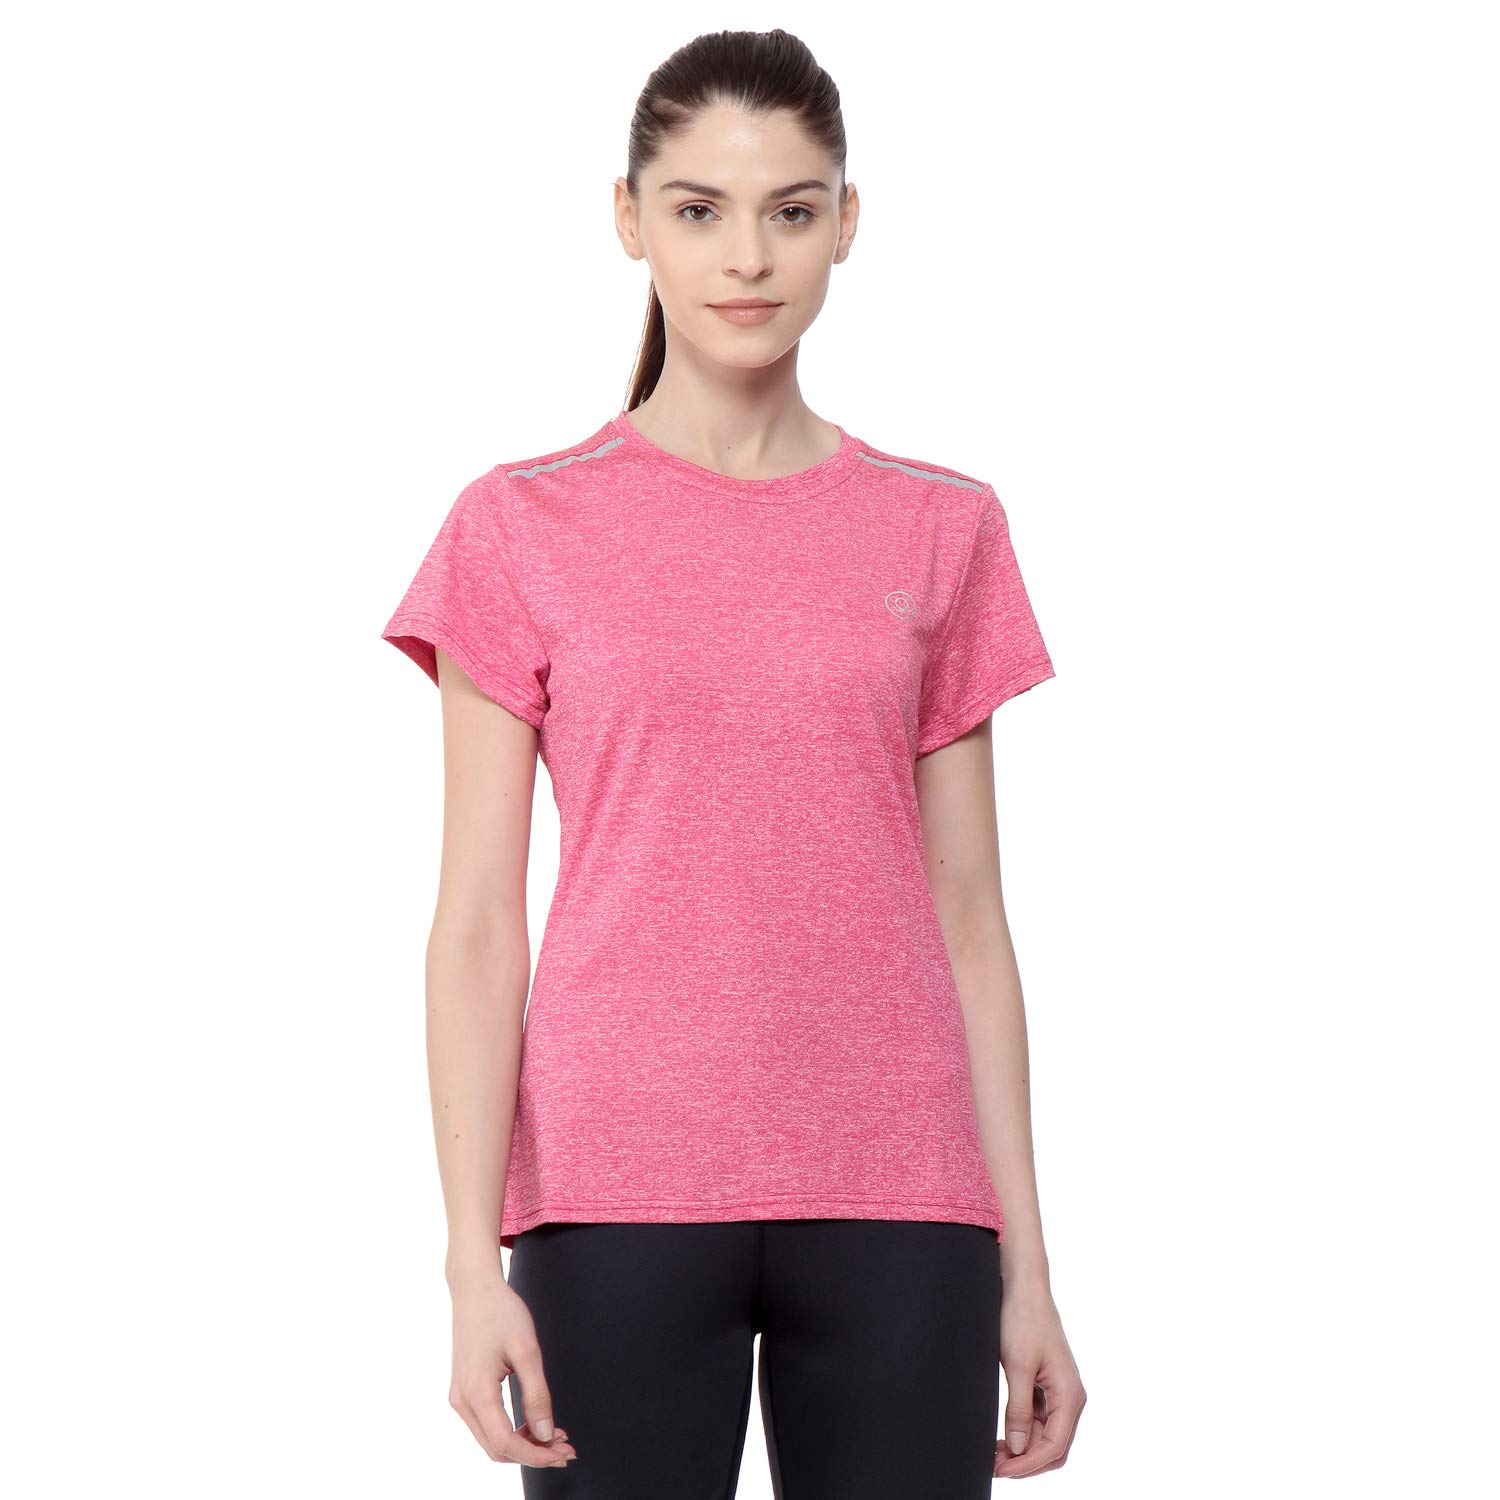 Best Gym T-Shirts For Ladies For A Comfortable Workout